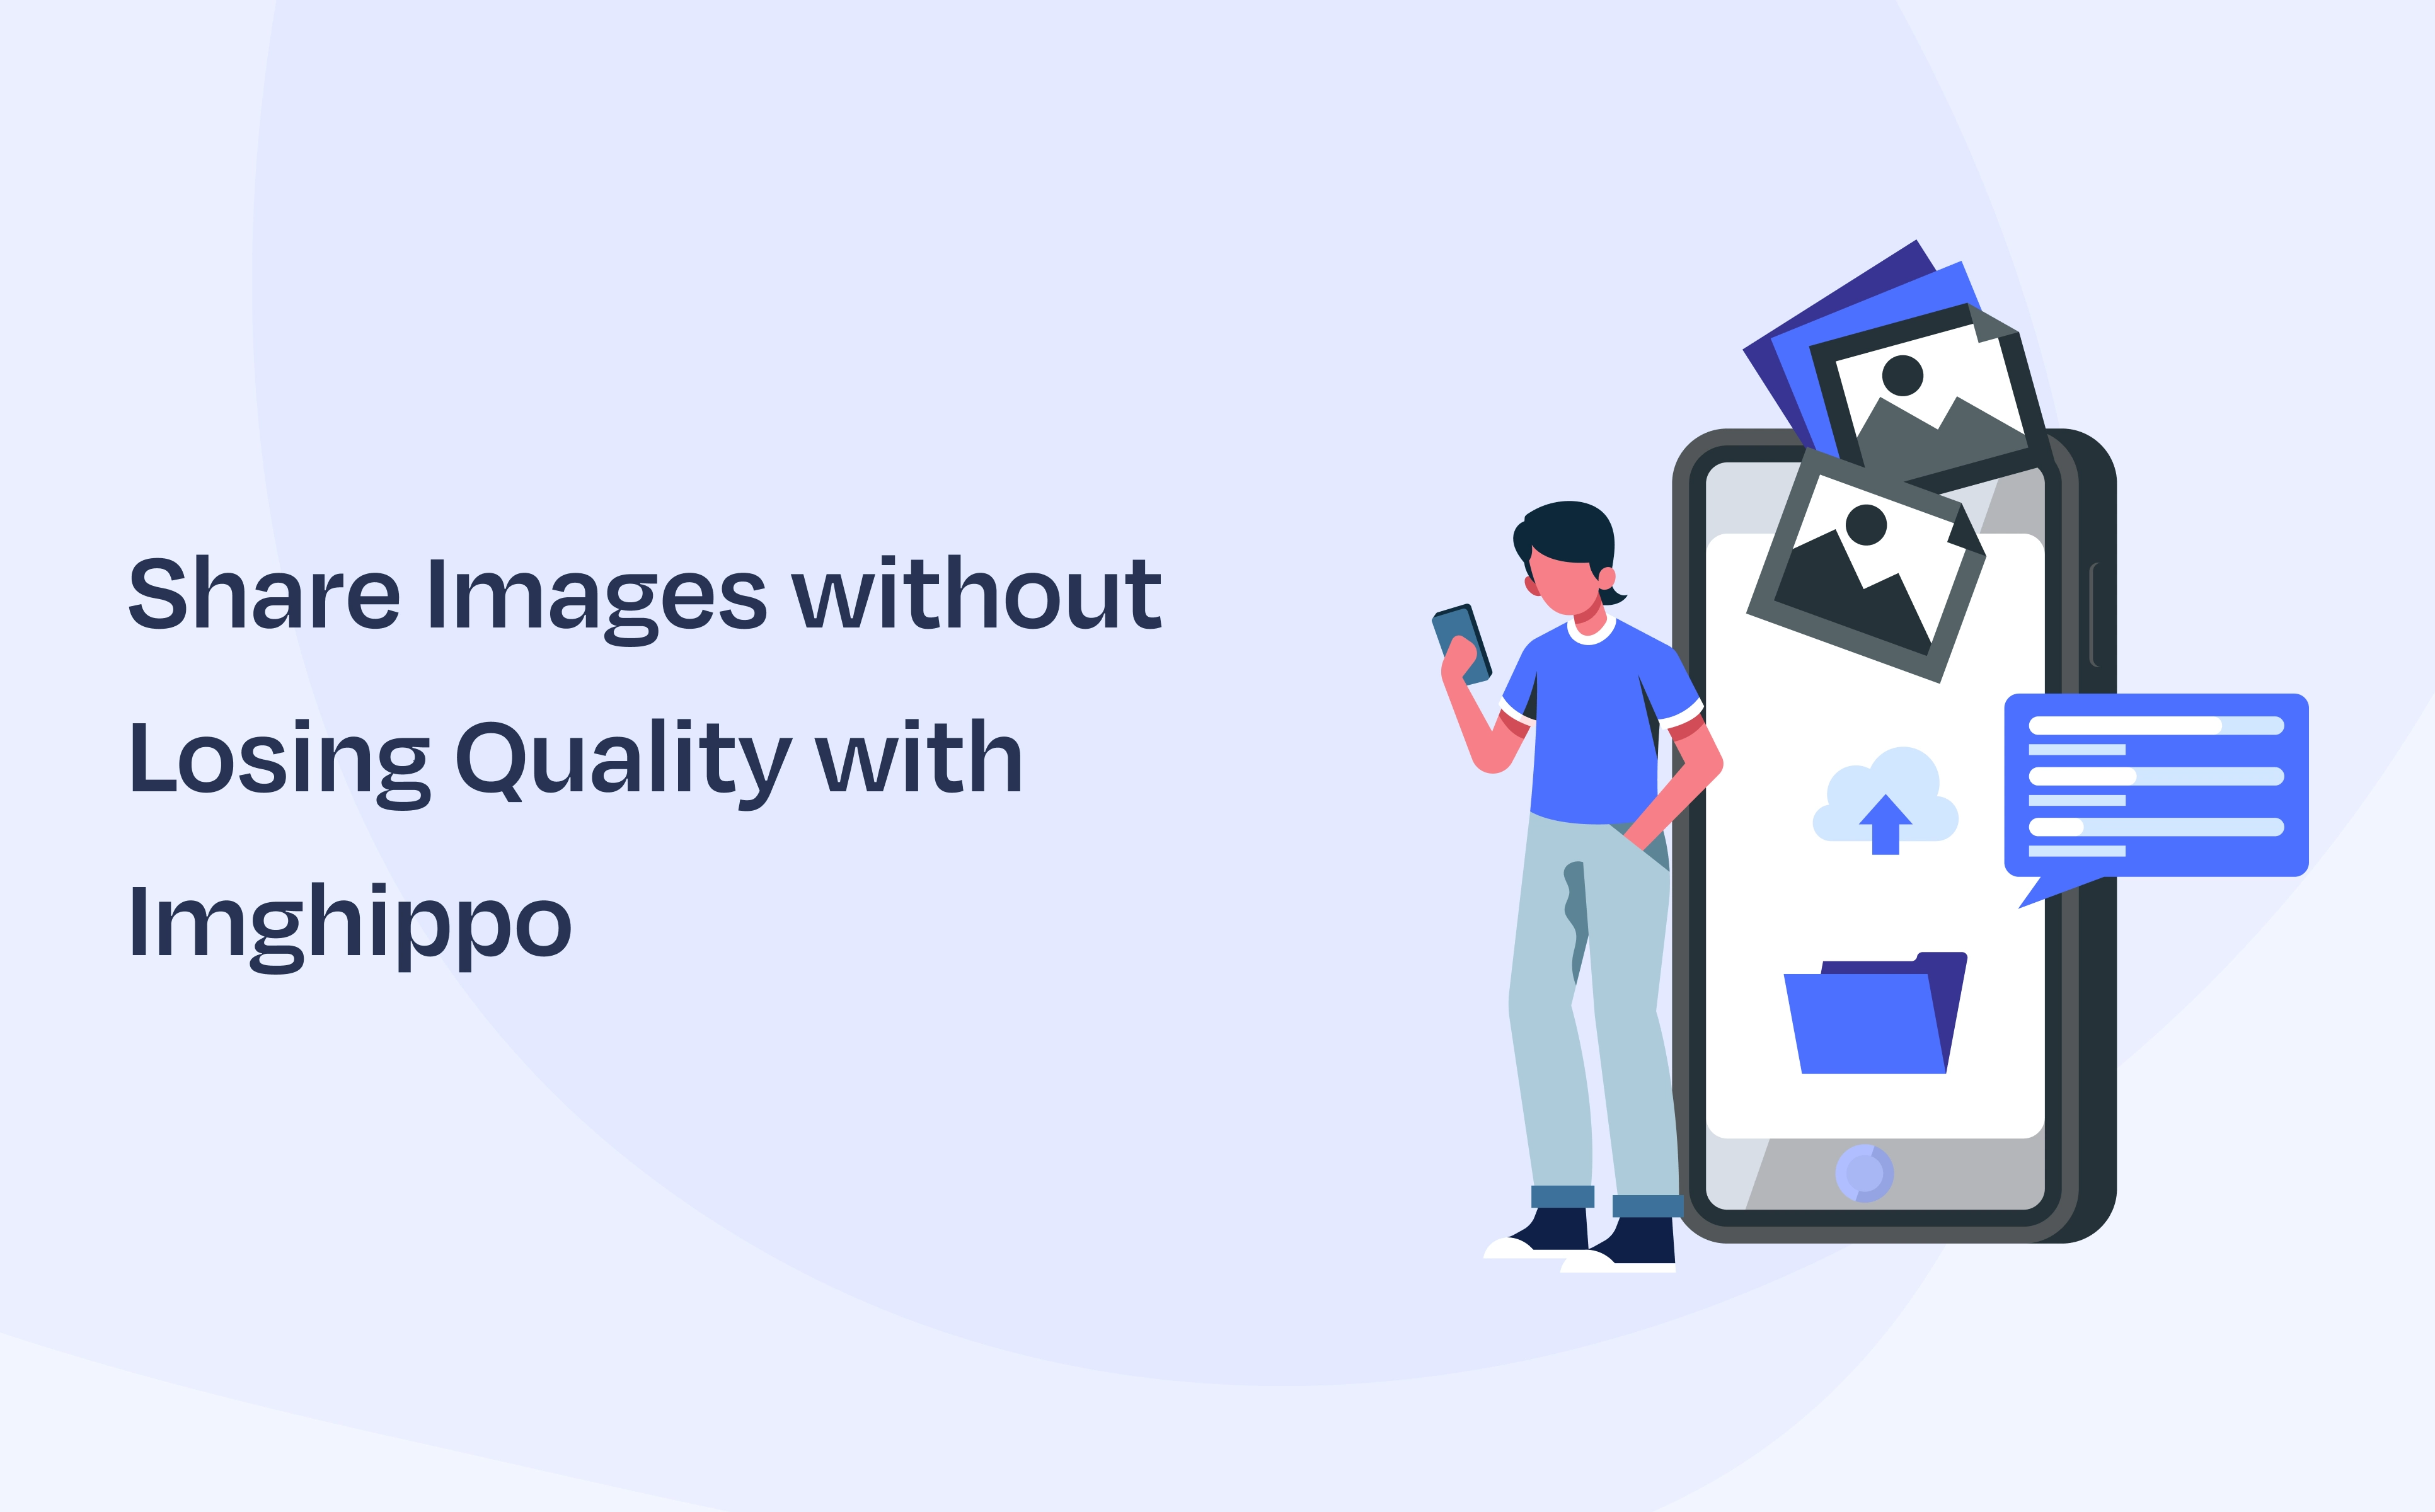 Icon and text 'Share Images without losing quality with Imghippo'